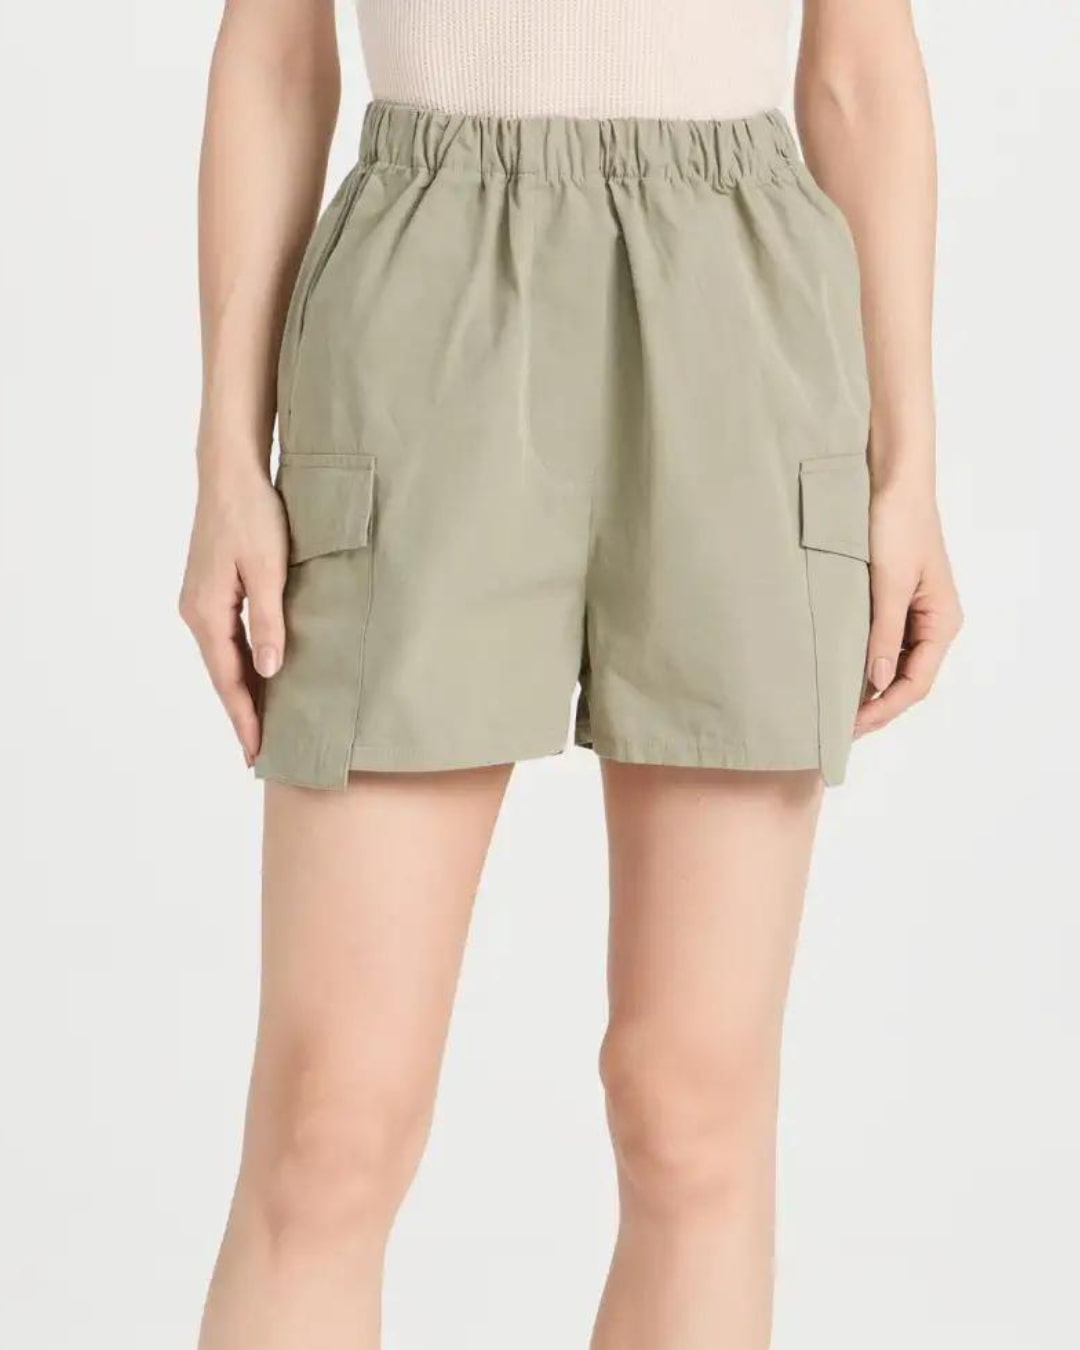 Spring Capsule Wardroble Green Shorts Style